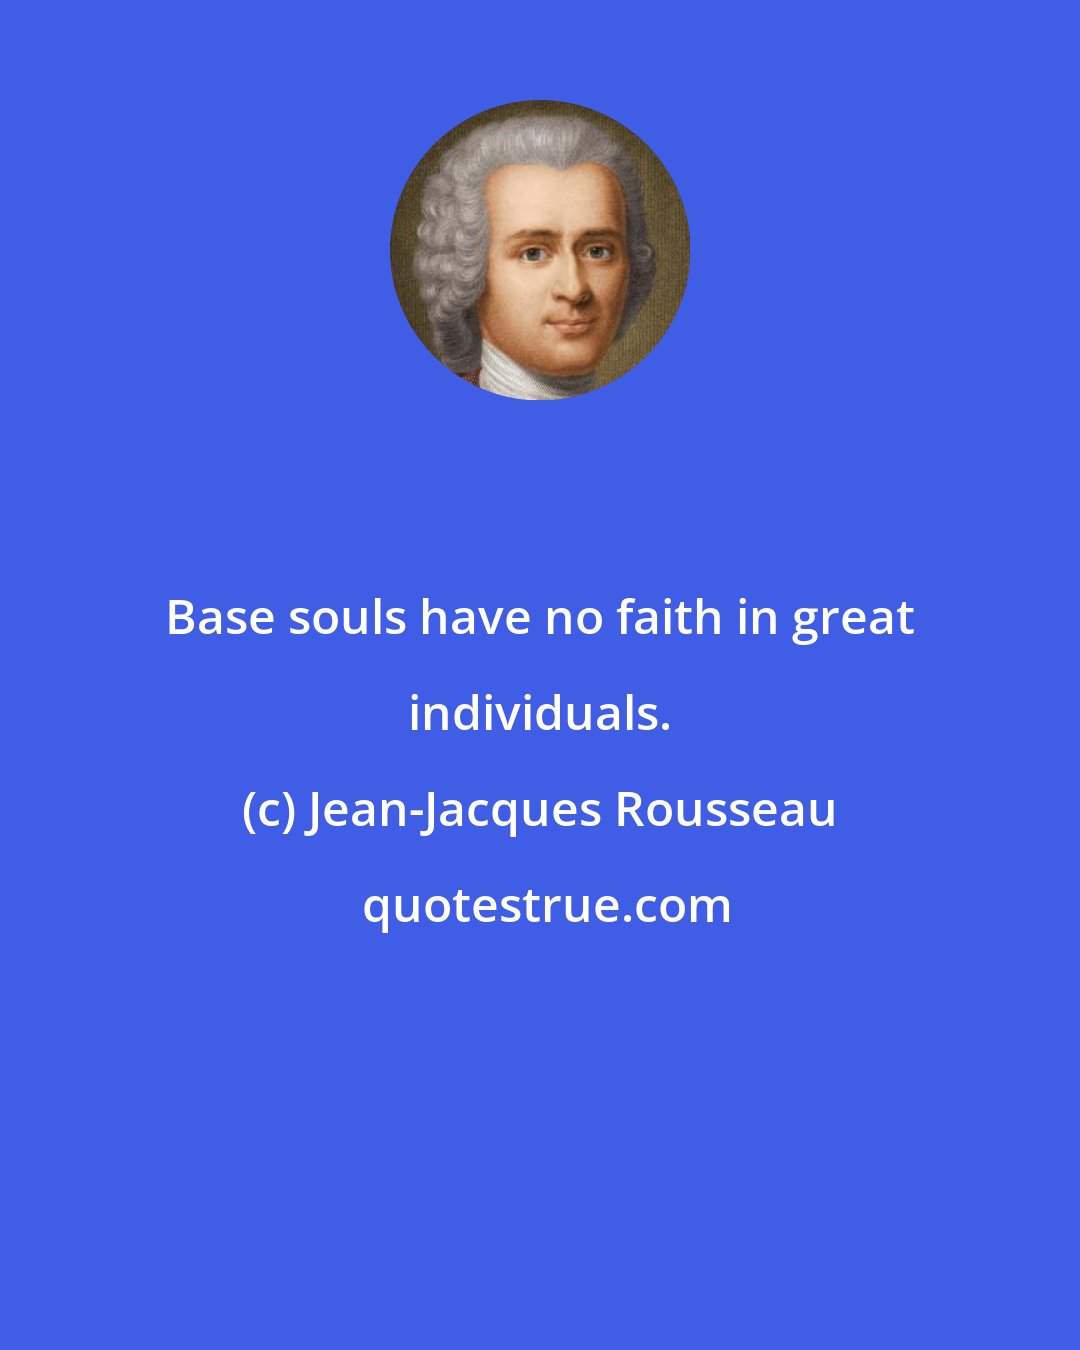 Jean-Jacques Rousseau: Base souls have no faith in great individuals.